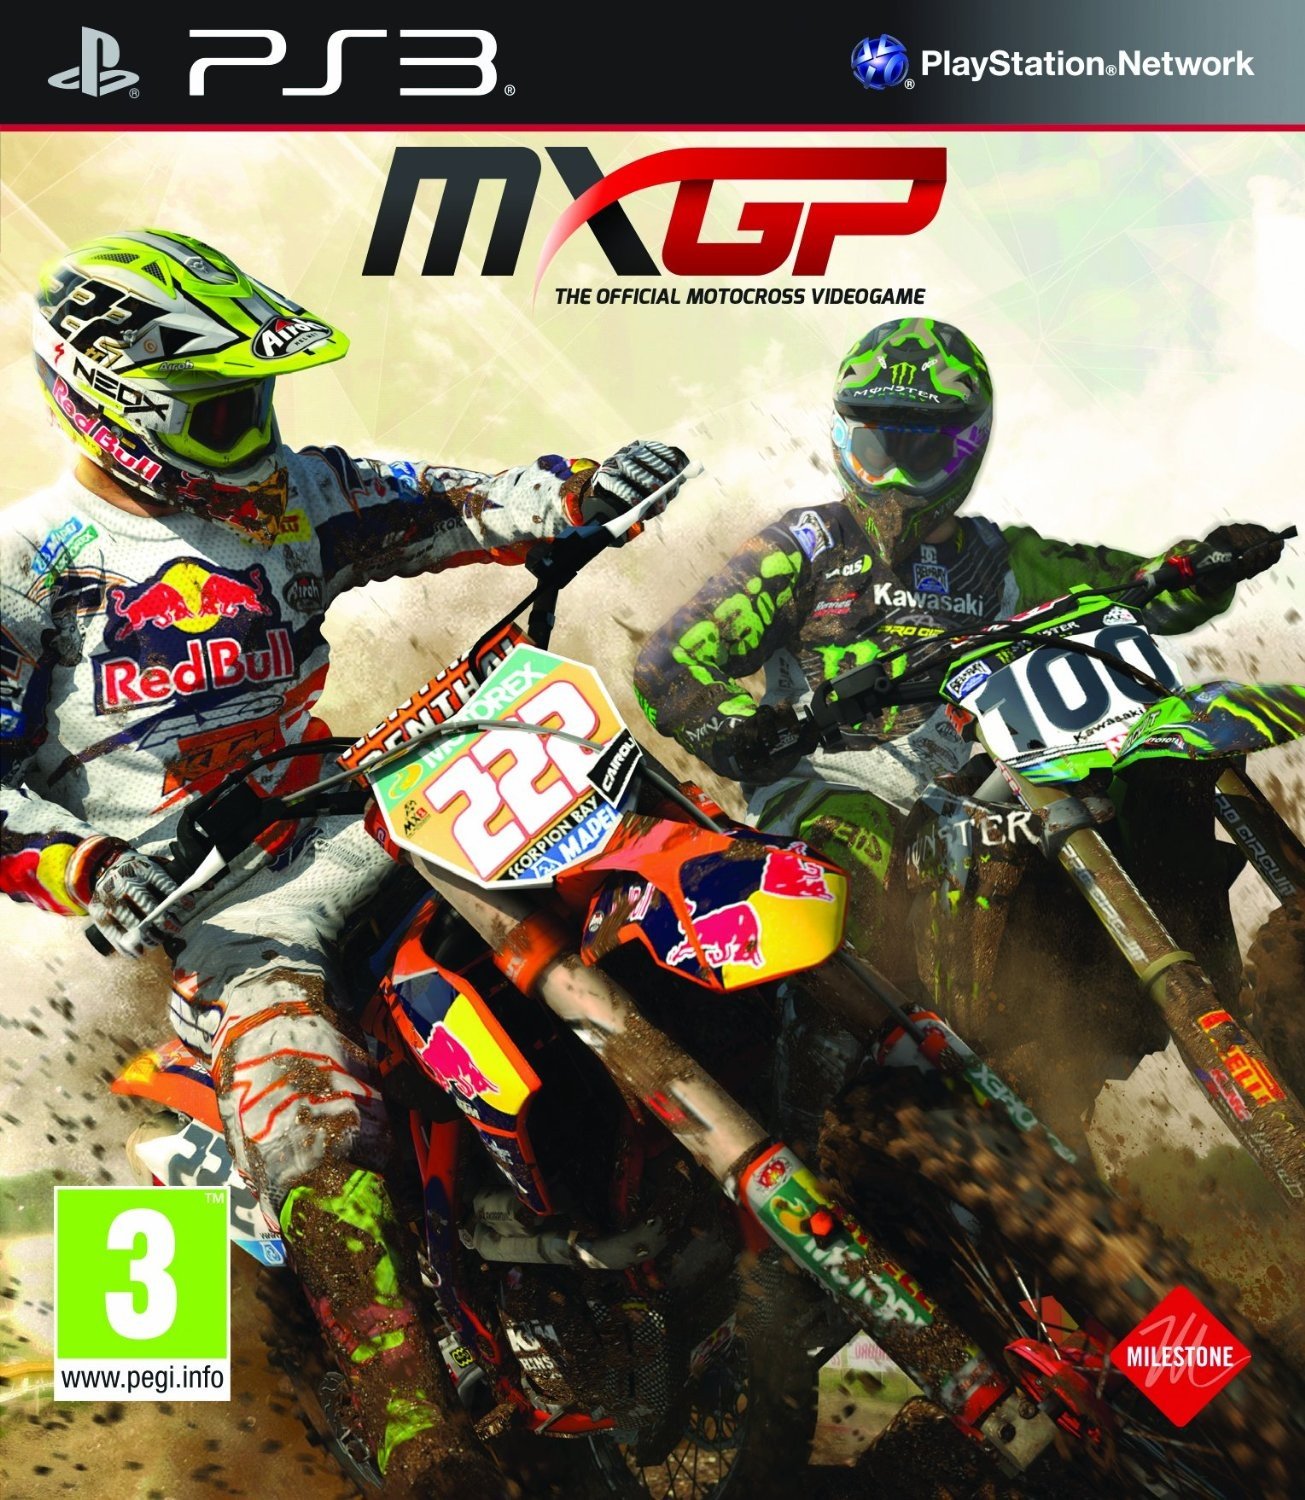 Image of MXGP: The Official Motocross Videogame